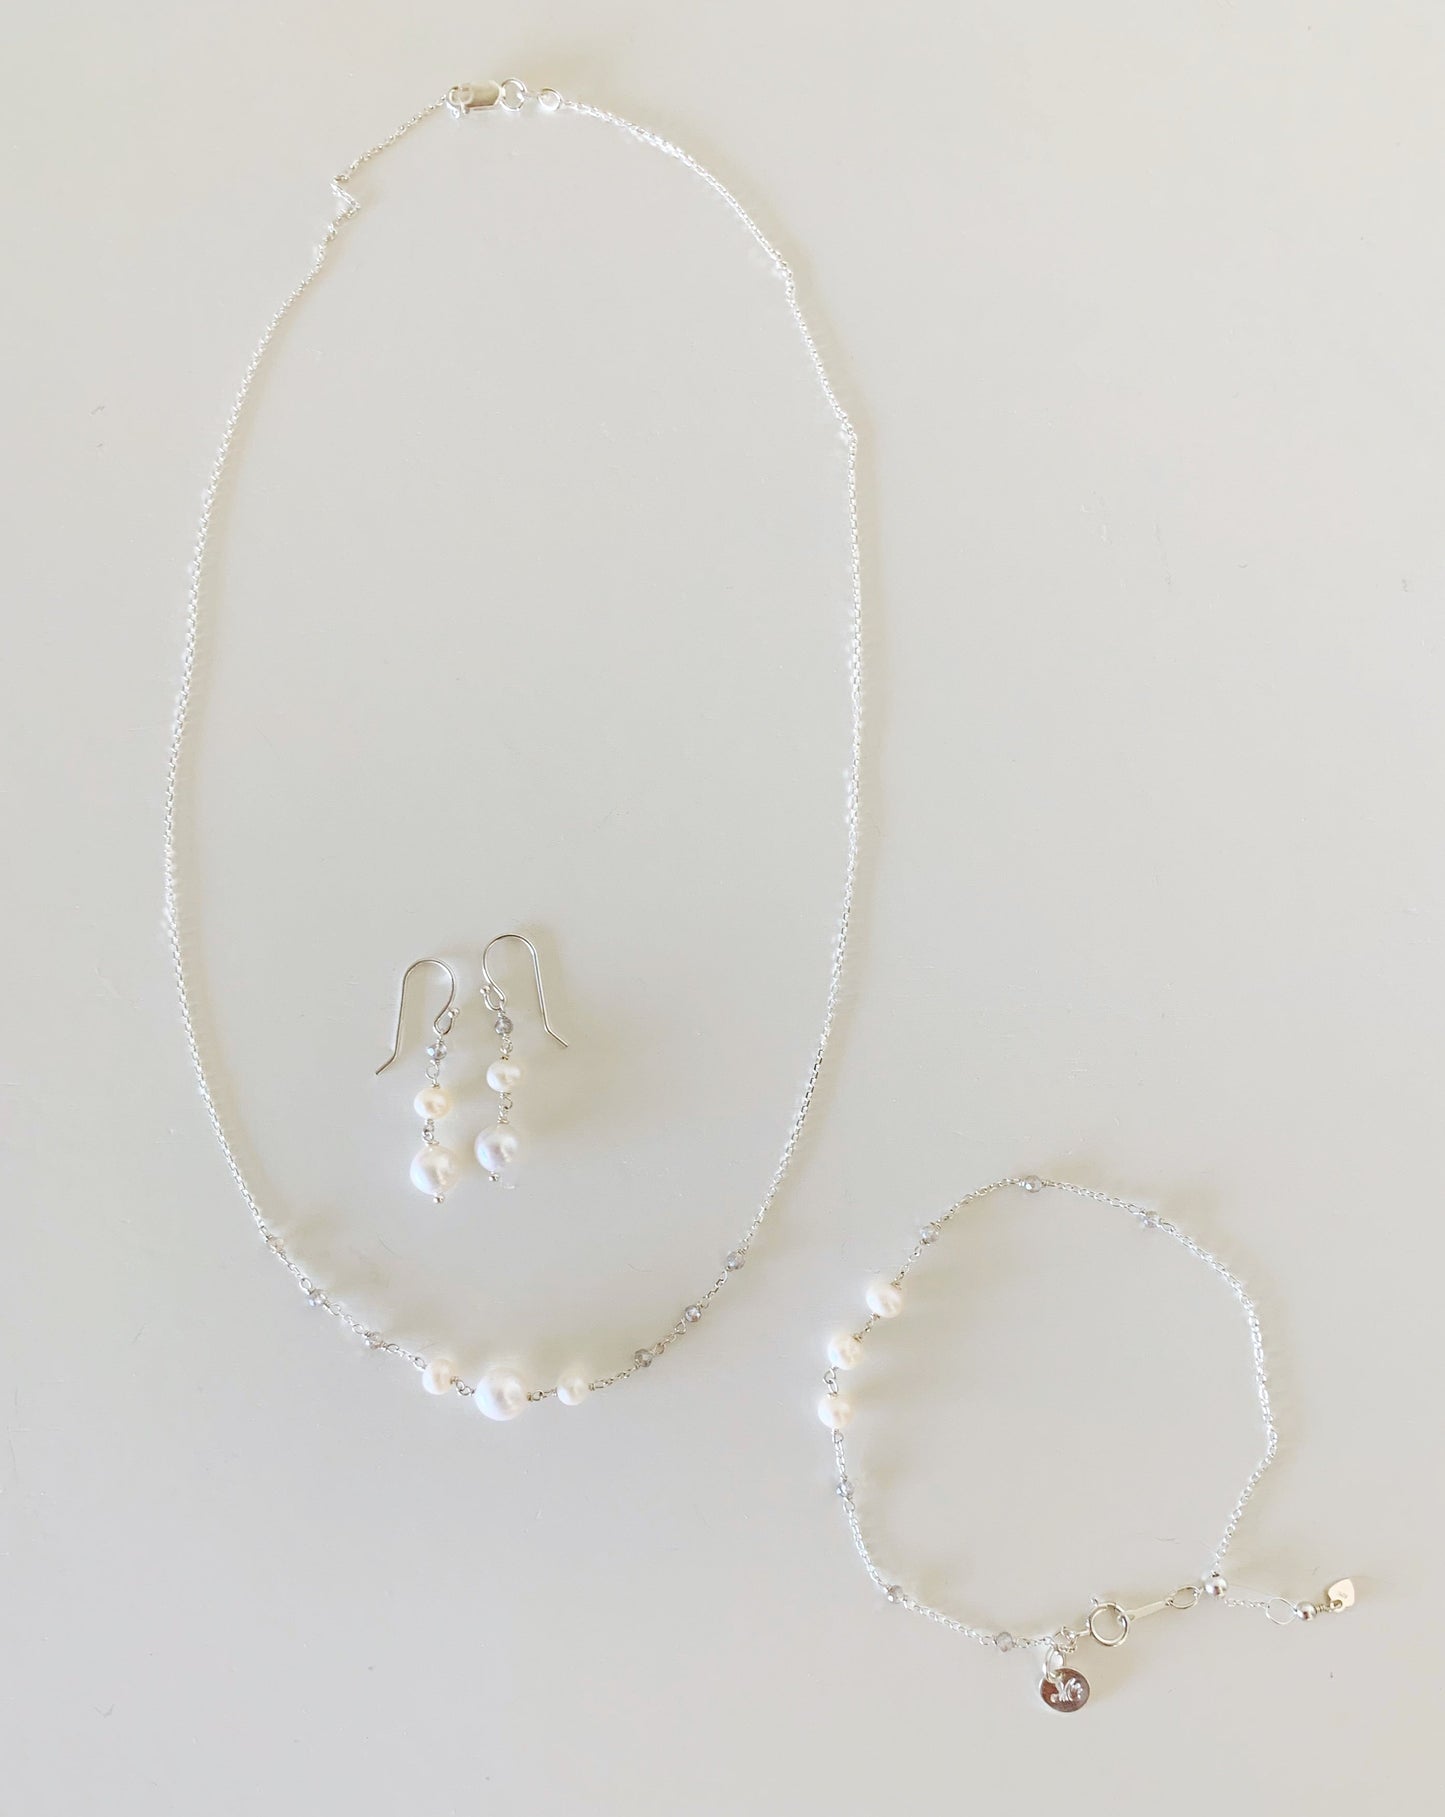 Westport  series by mermaids and madeleines is a necklace, bracelet and earrings created with freshwater pearl and labradorite gems on sterling silver chain. this  series is photographed on a white surface